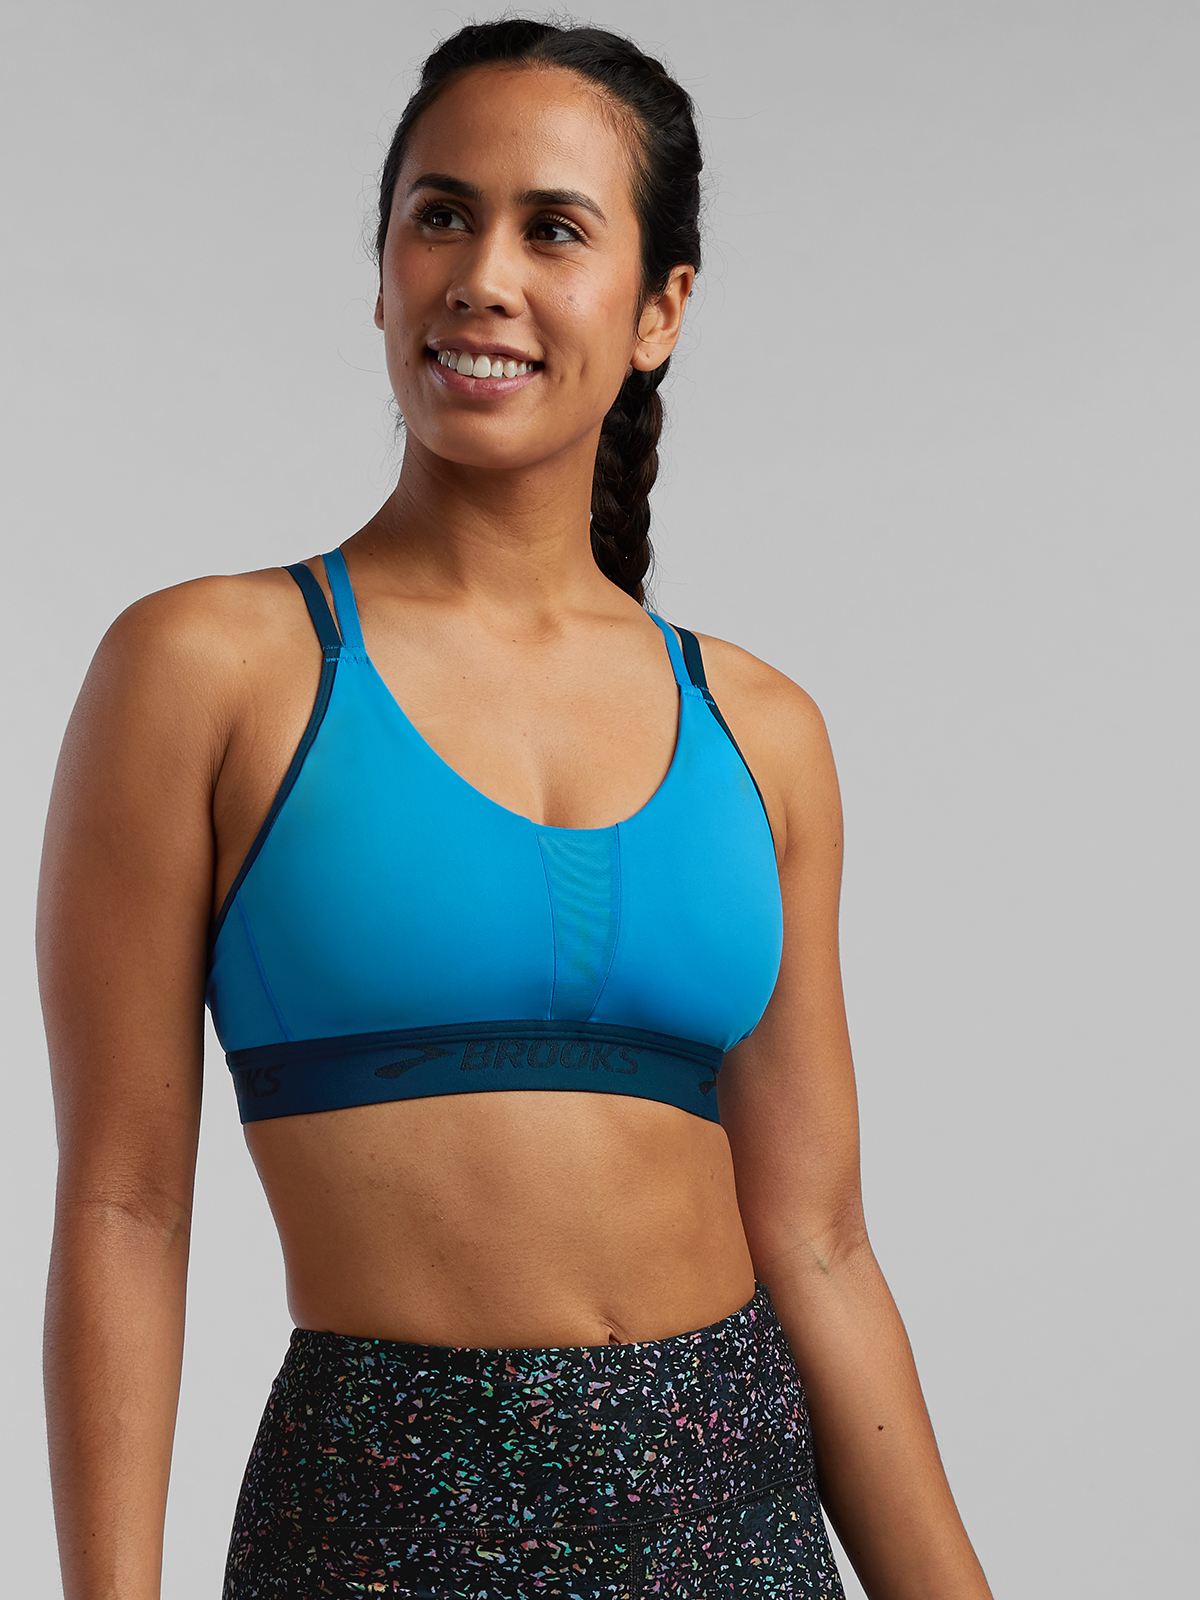 Beyond Yoga Crossed For Words Bralette Sports Bra Womens Size Small (4-6)